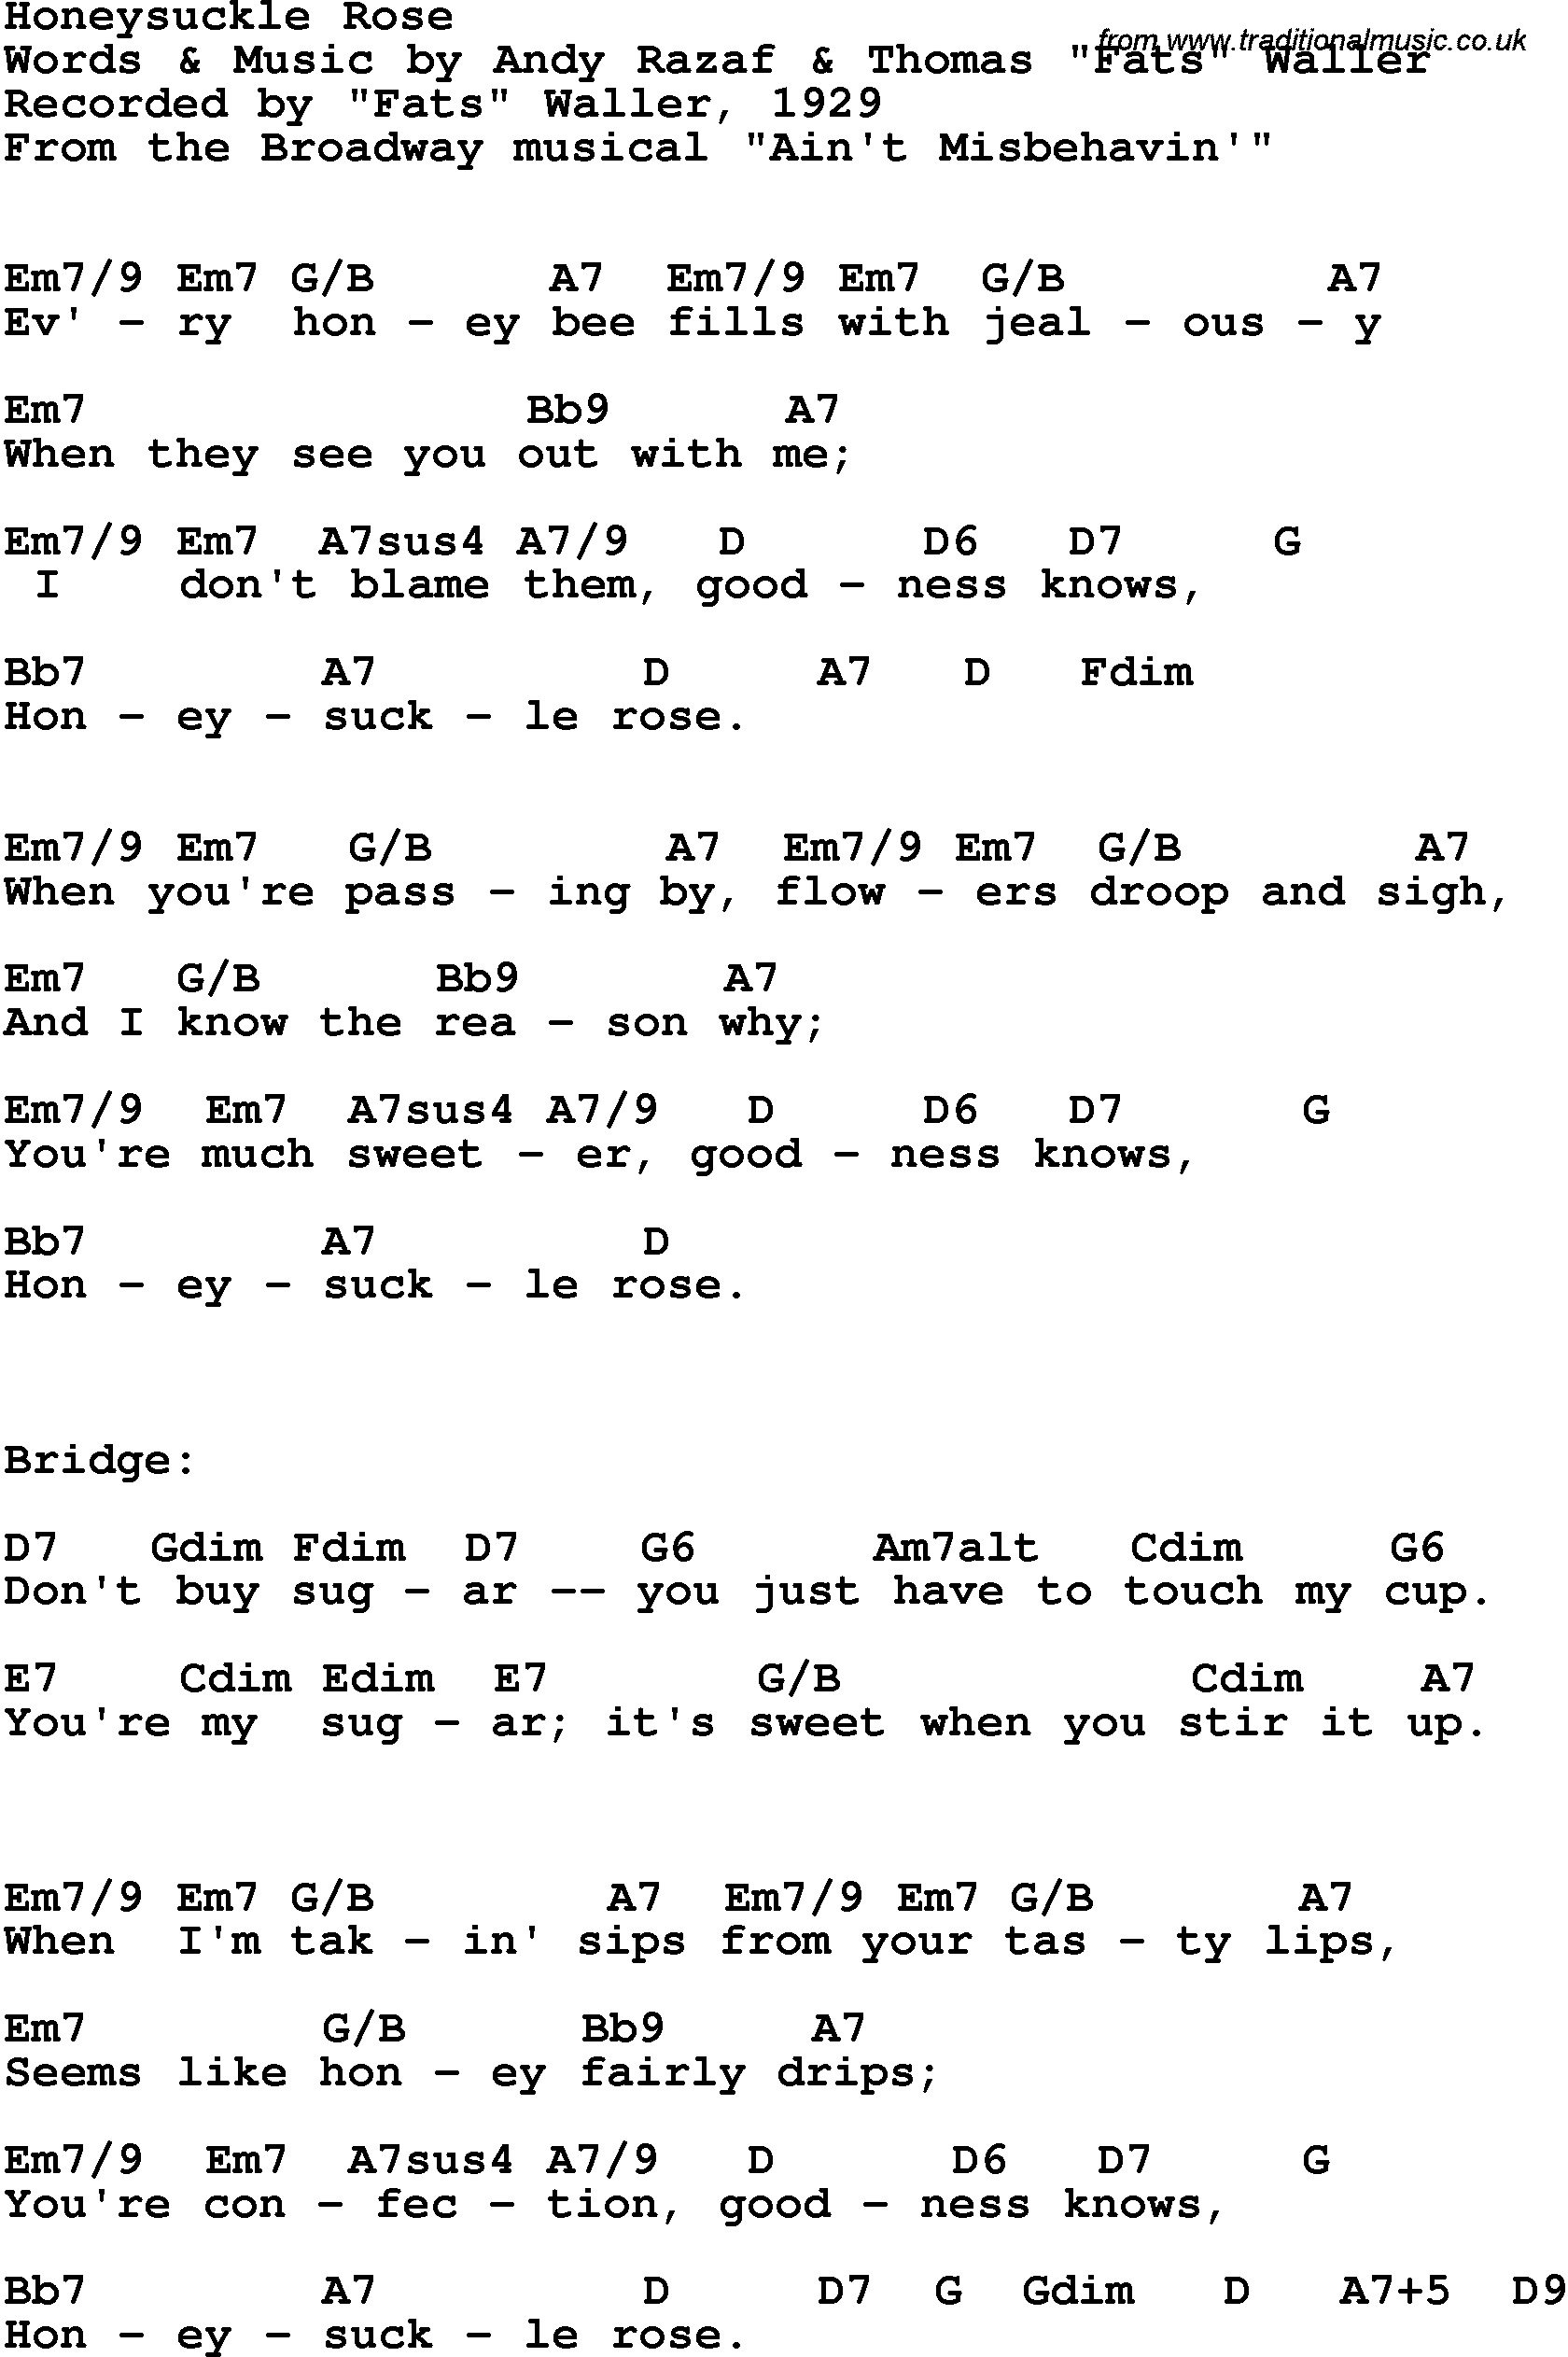 Song Lyrics with guitar chords for Honeysuckle Rose - Fats Waller, 1929